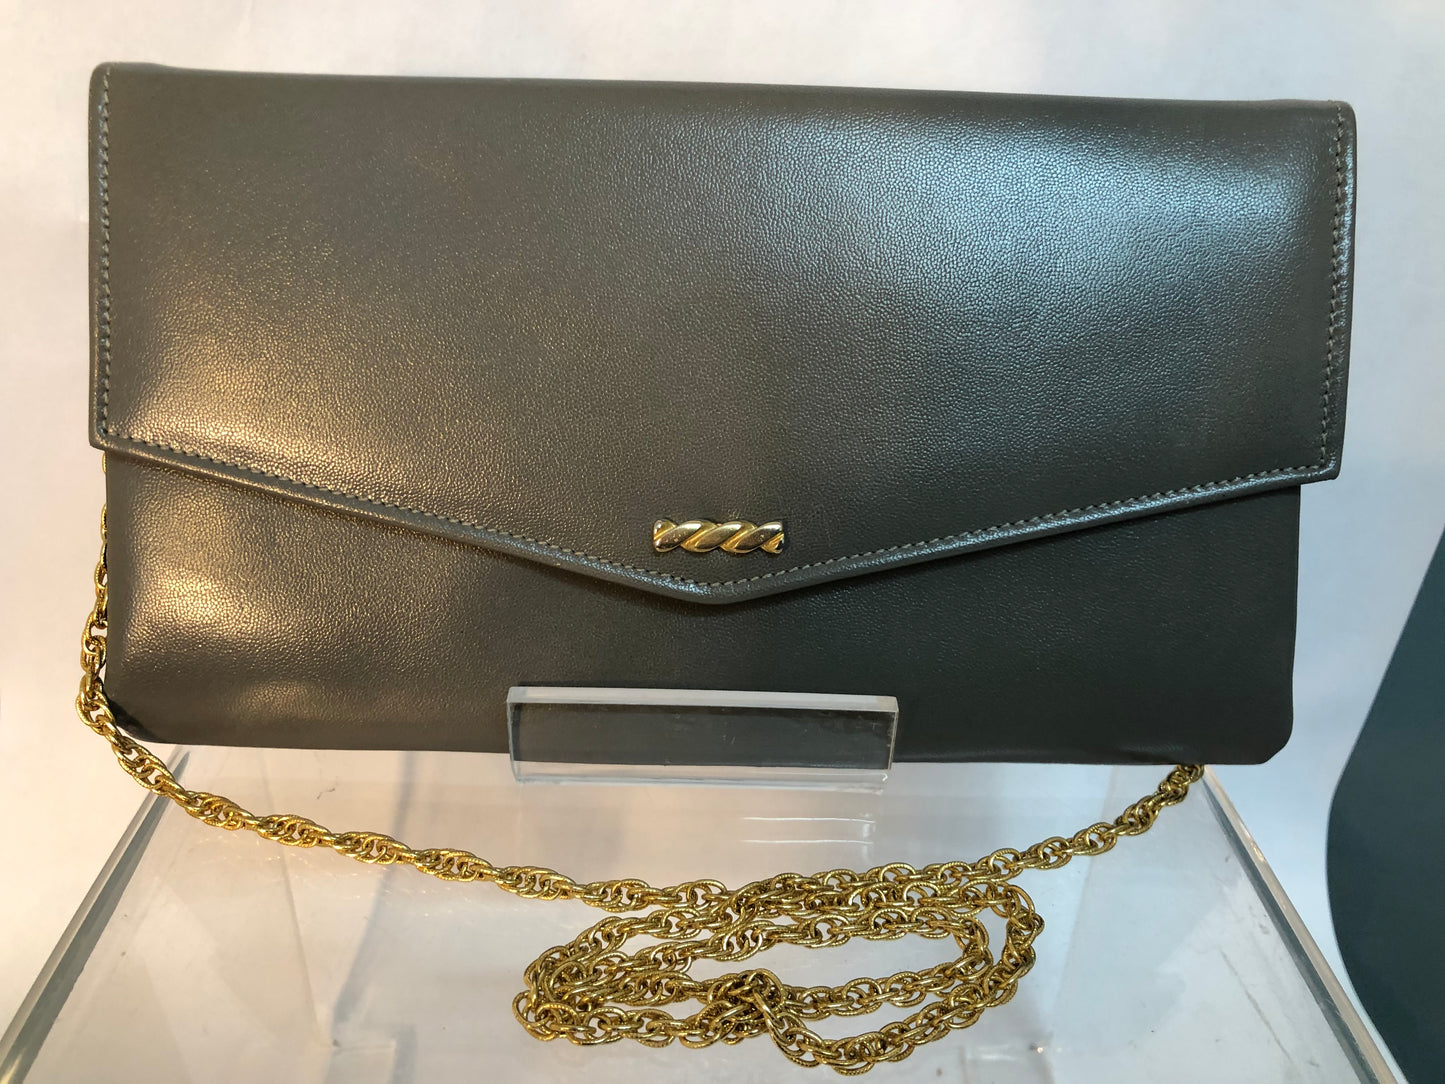 Grey Leather Crossbody Bag with Gold Chain Straps